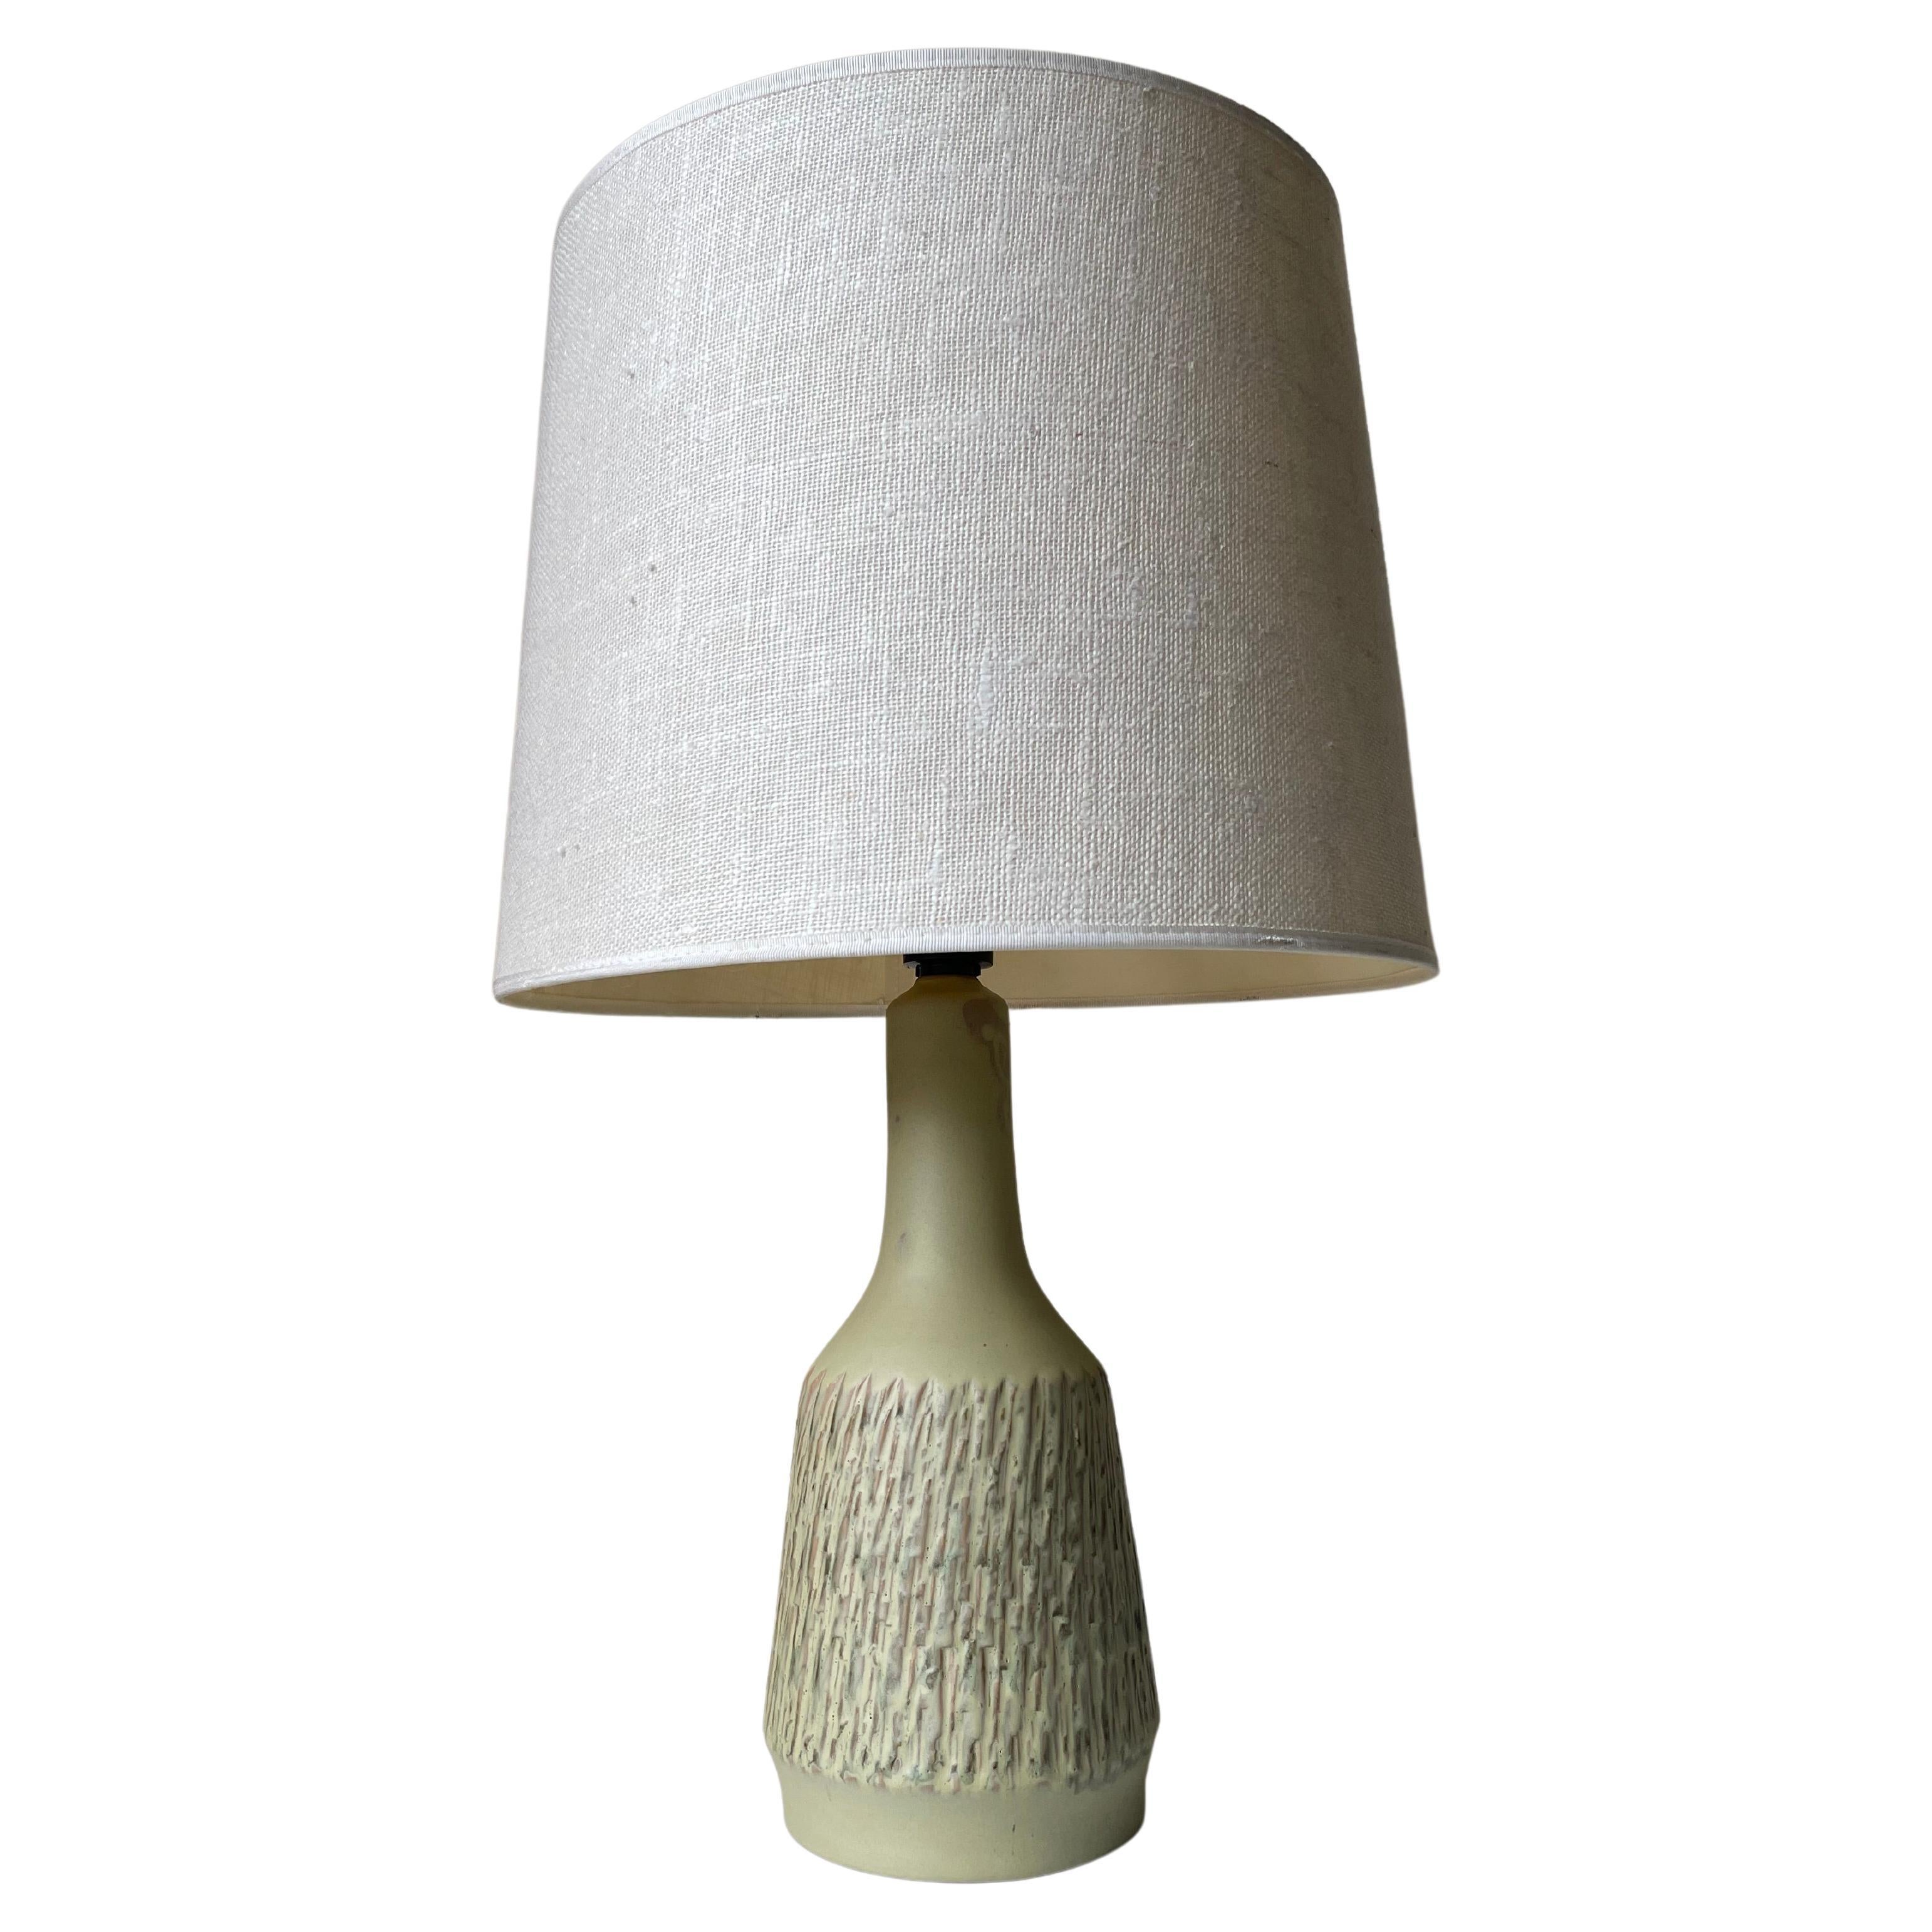 Matte dusty light olive green glazed ceramic table lamp with hand-carved textured body. Slight organic decor on the slender neck close to the original black fitting with switch. Rewired and in beautiful vintage condition.
Denmark, 1960s.